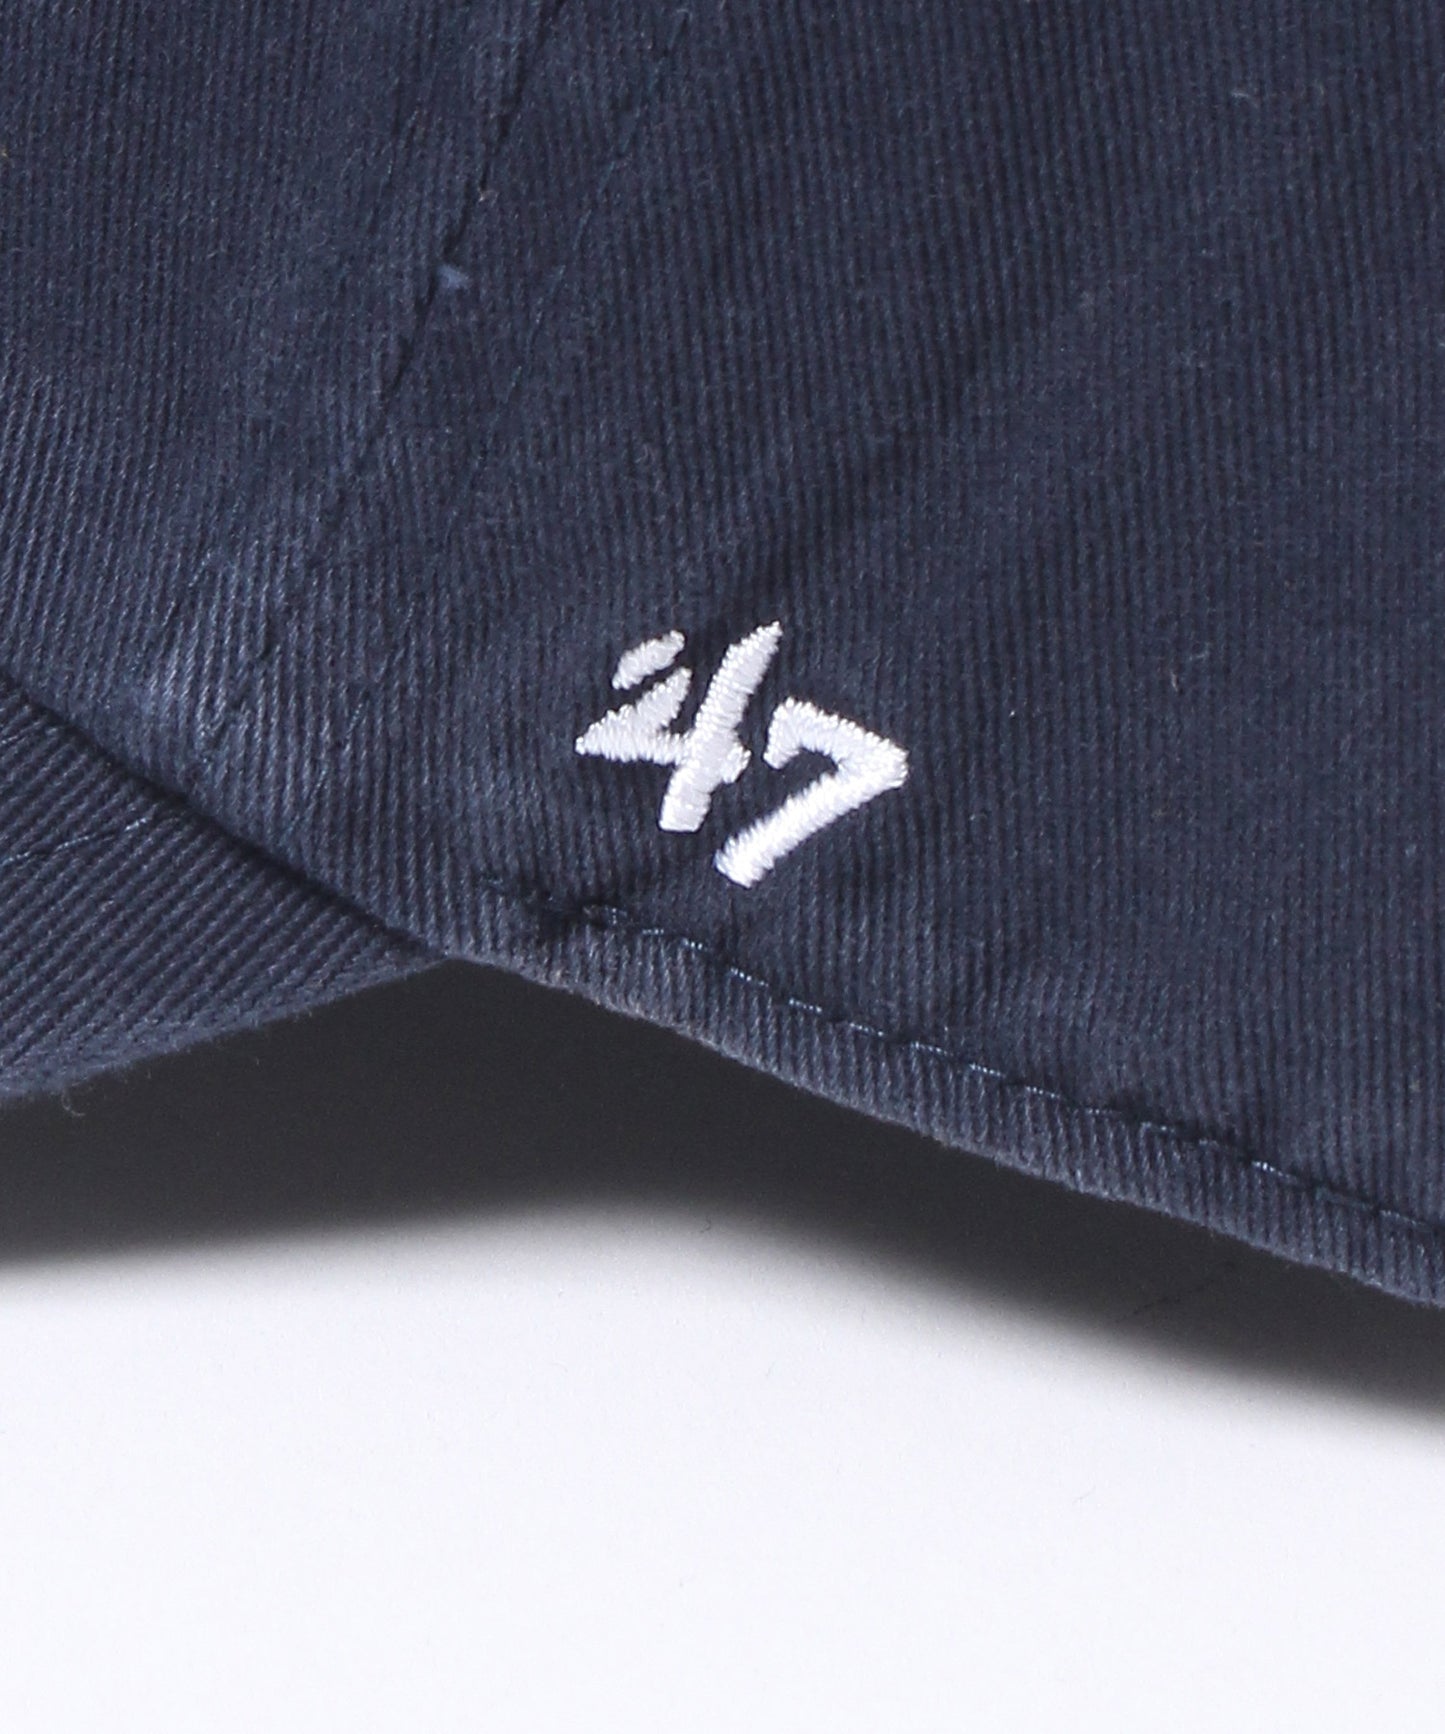 Yankees Home '47 CLEAN UP / ヤンキース クリーンナップ キャップ